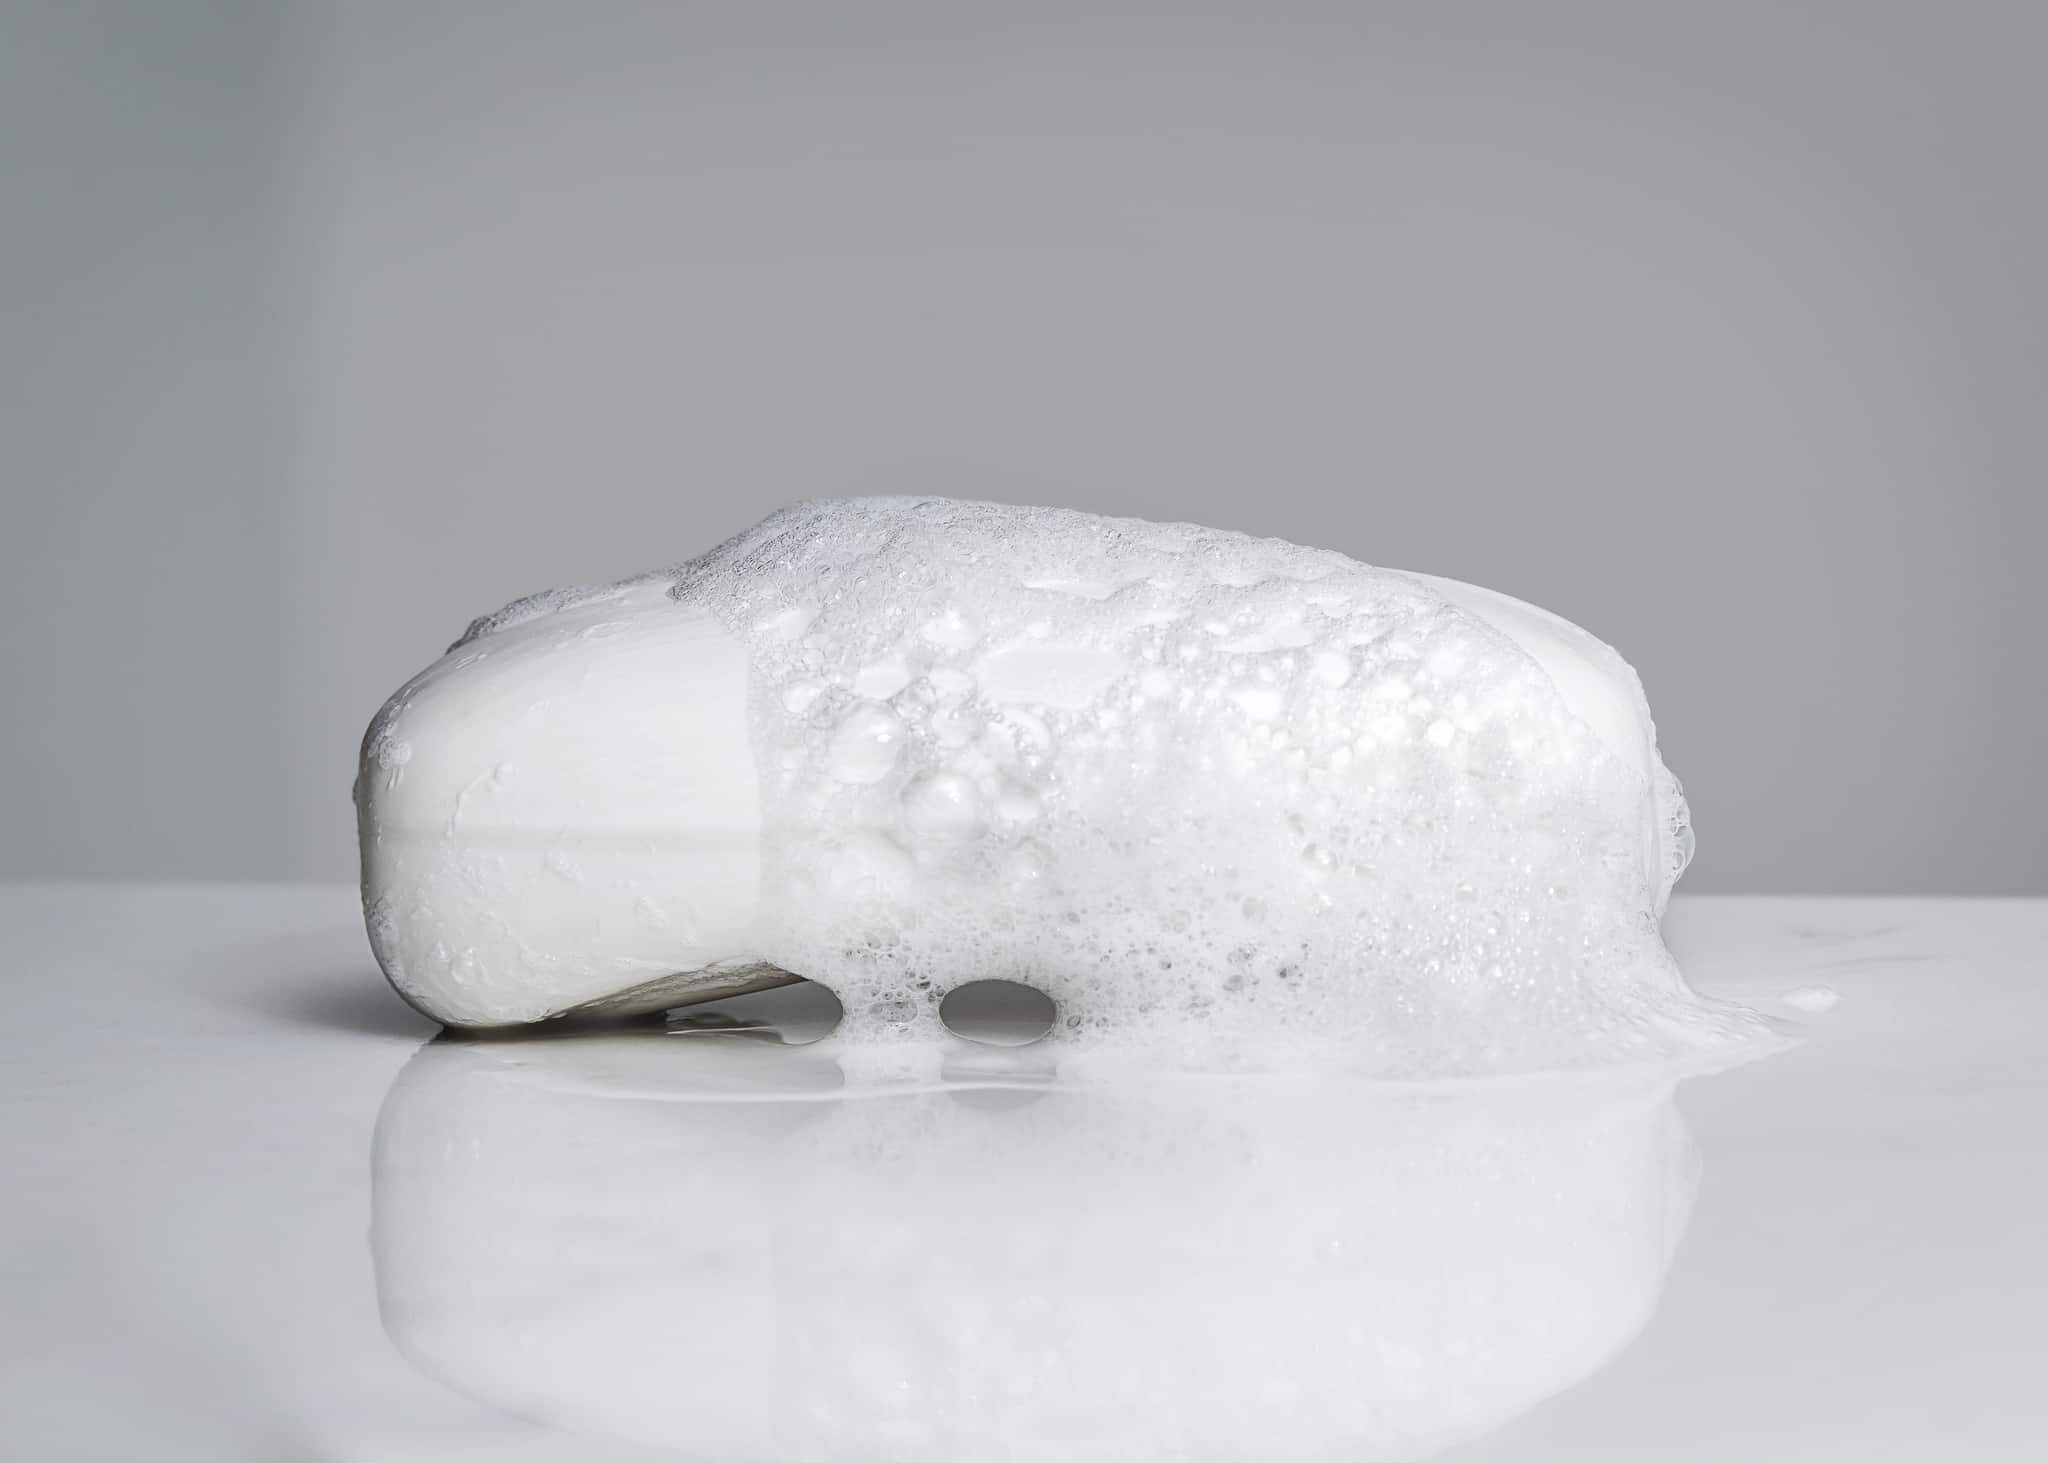 Bar of soap with soap suds